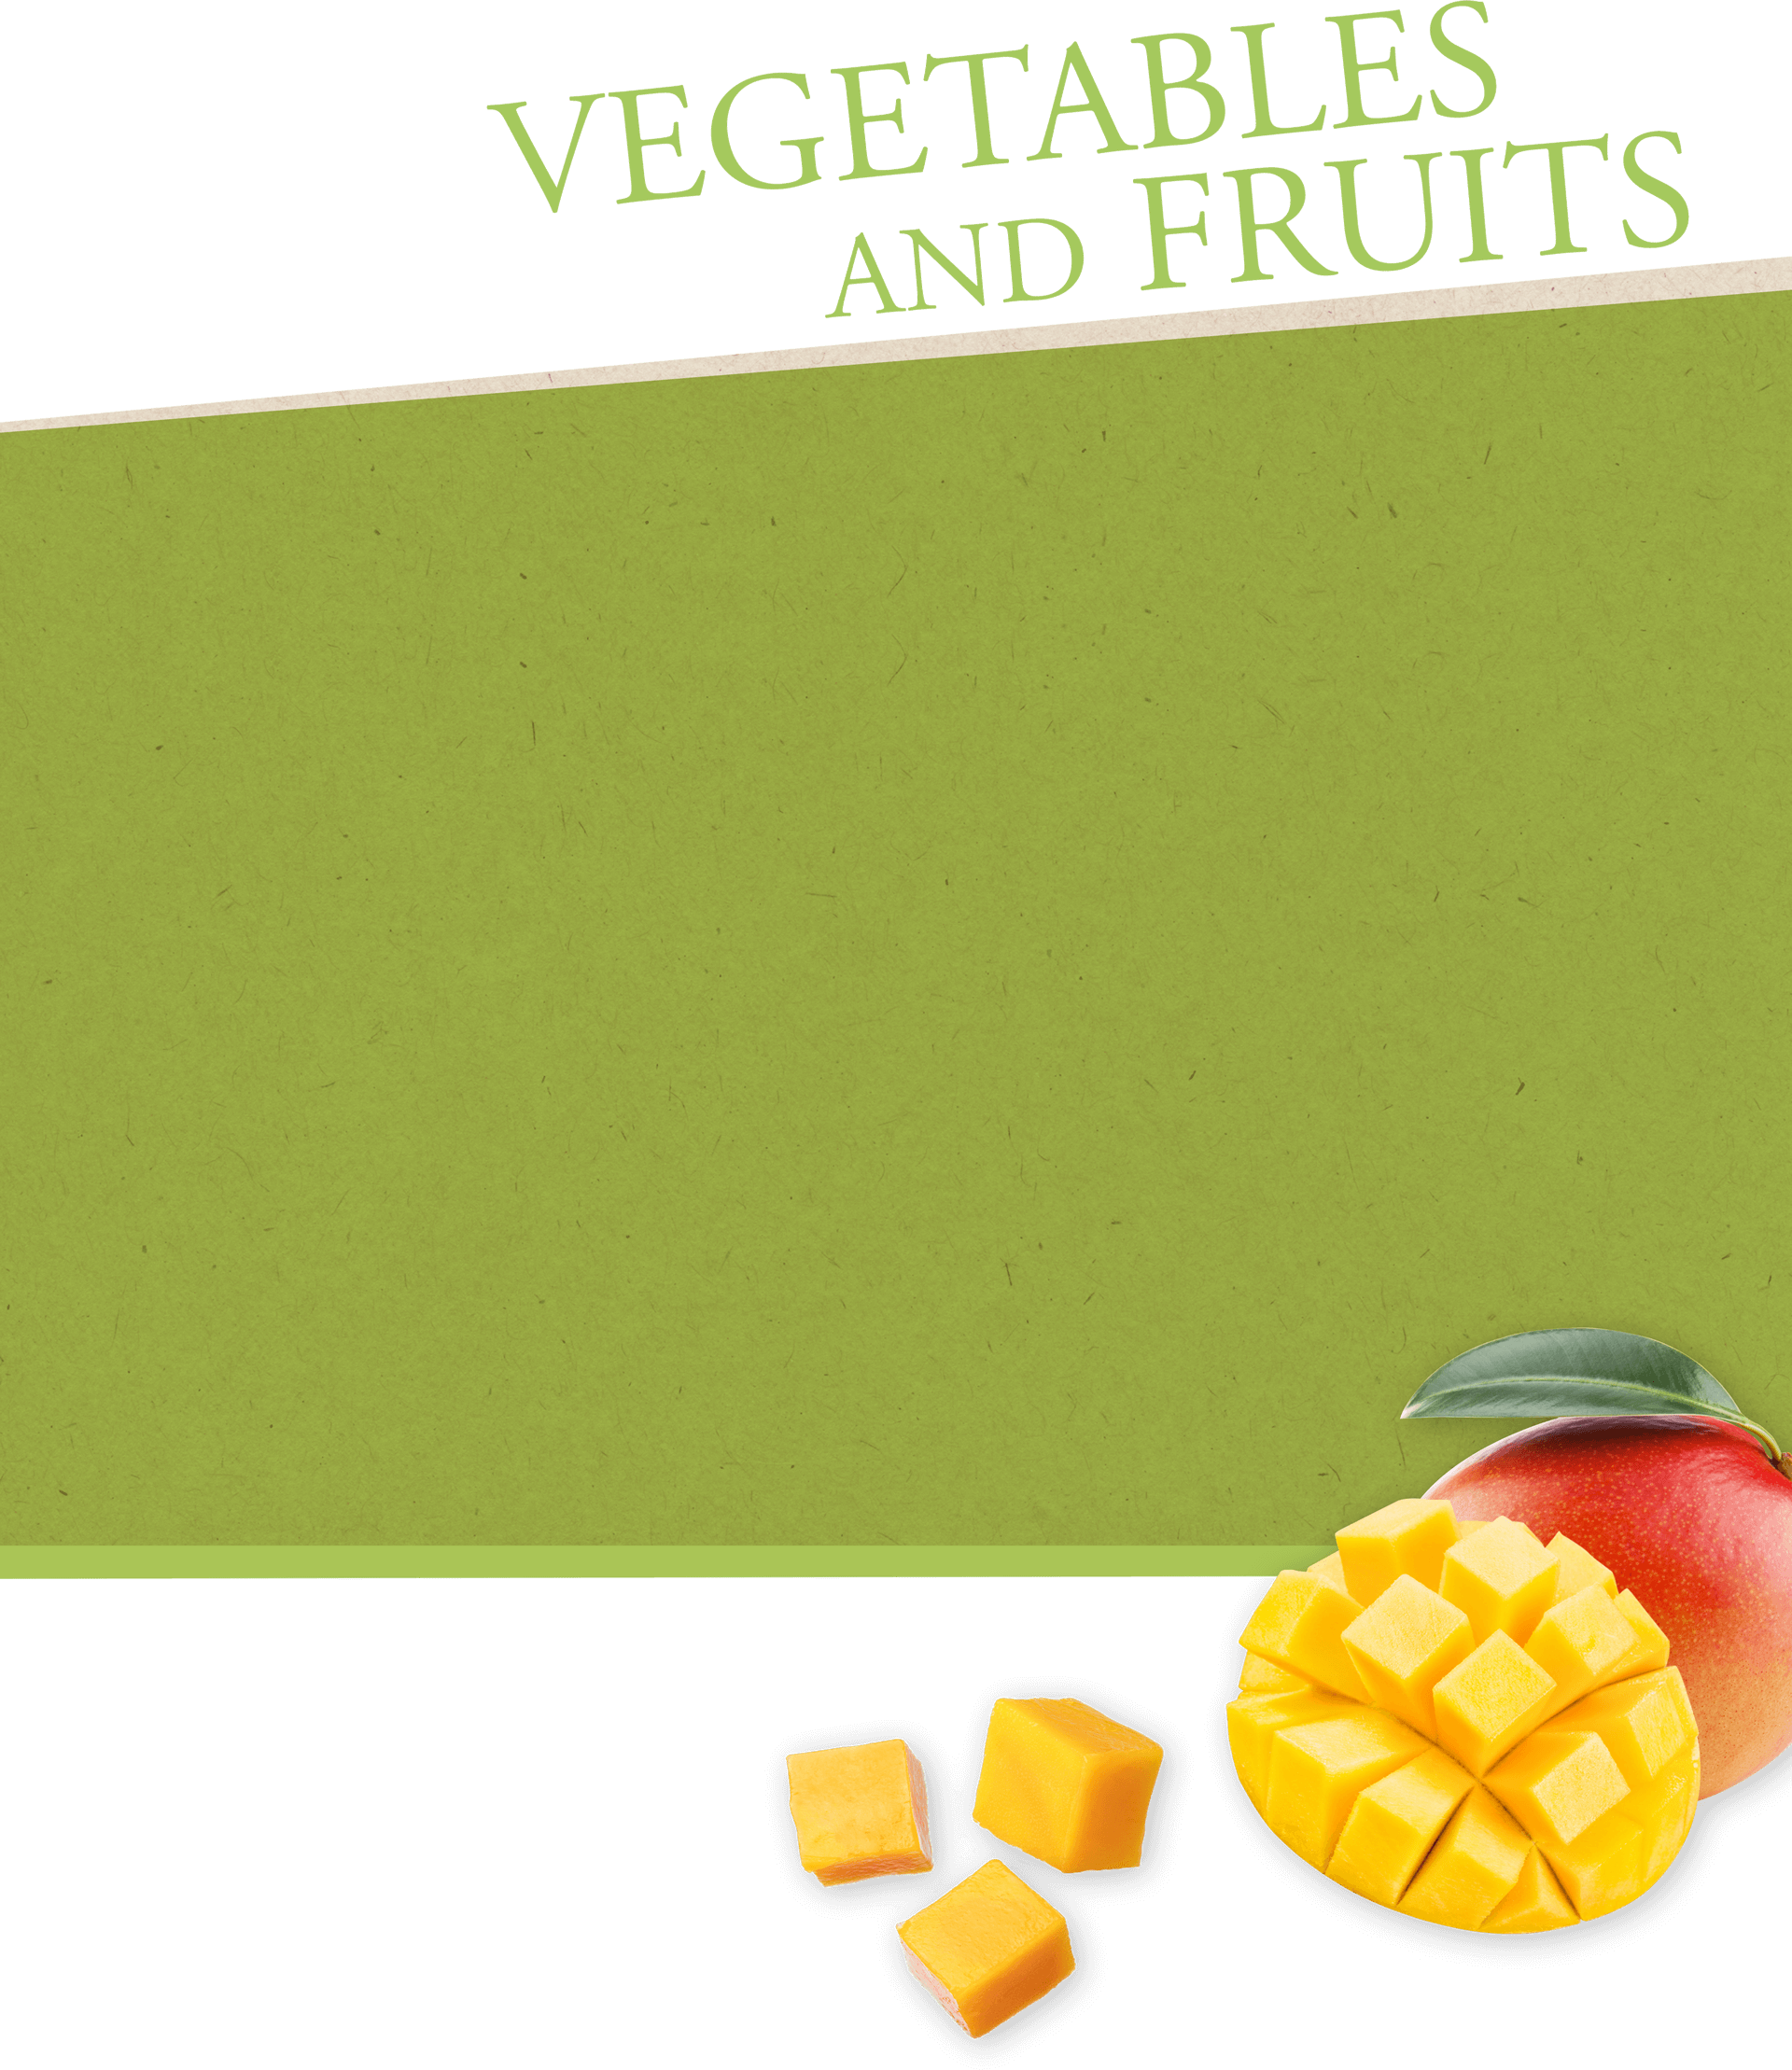 VAGETABLES AND FRUITS